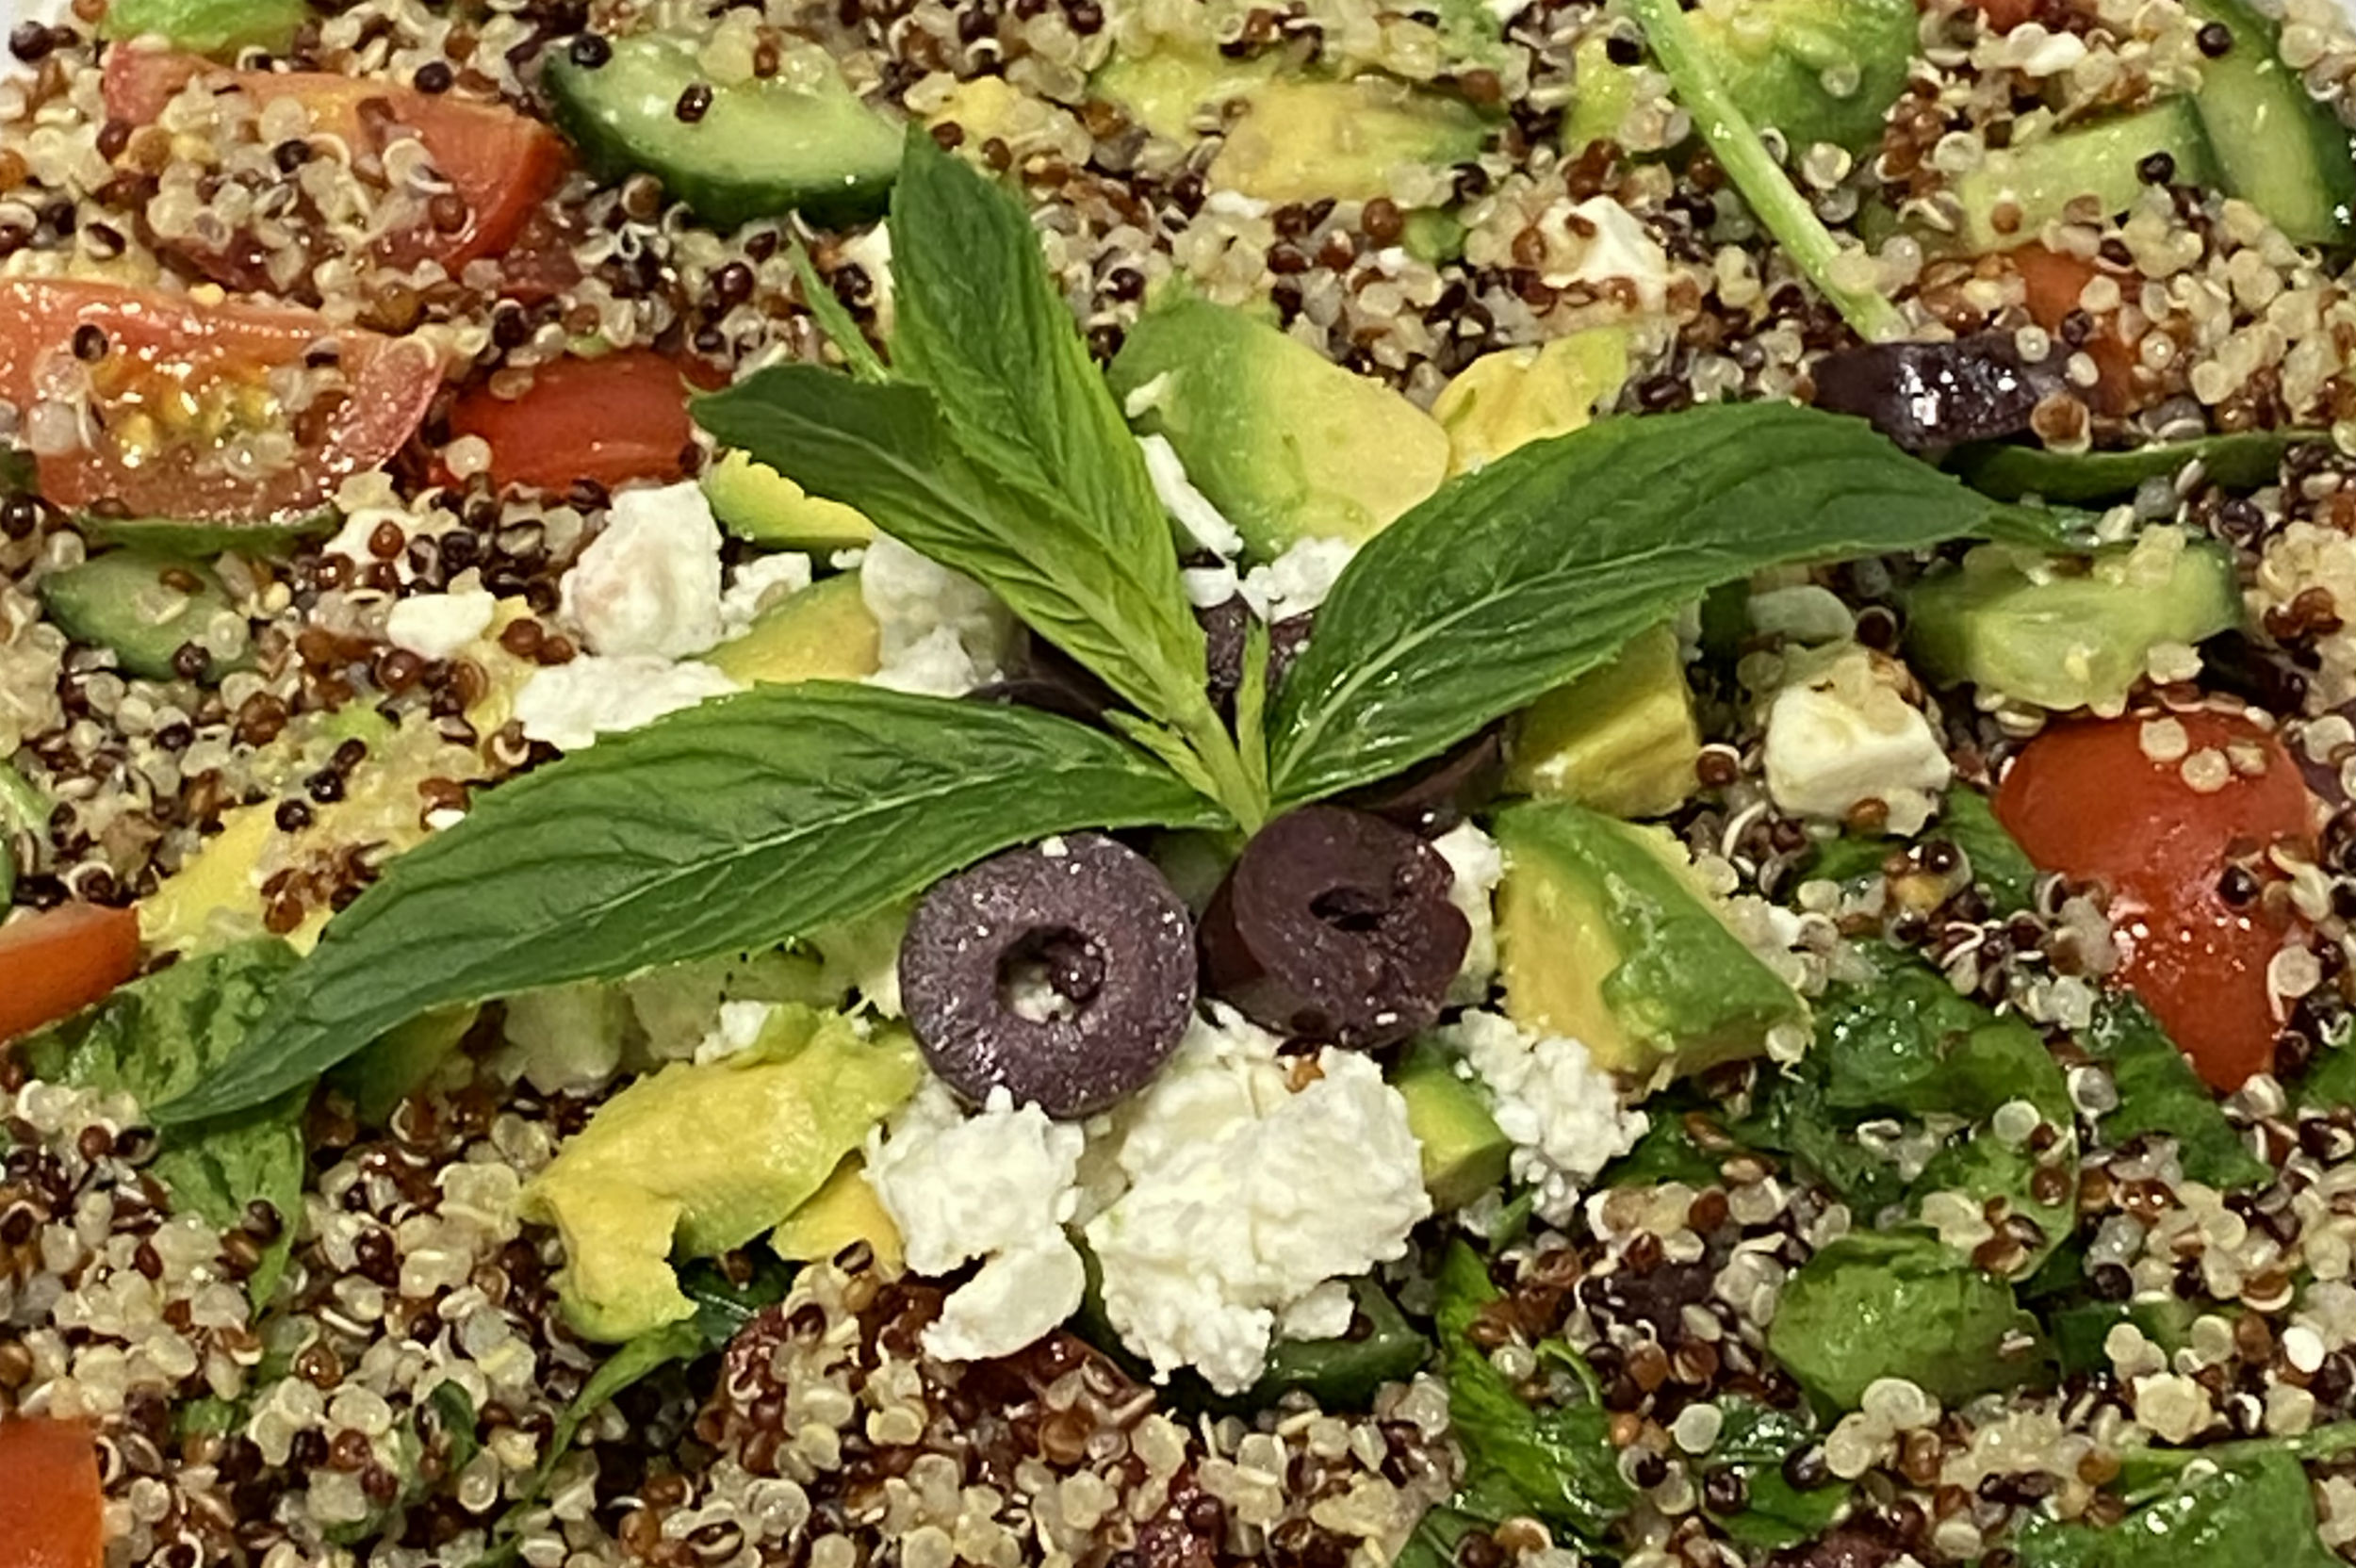 quinoa salad garnished with mint and olives